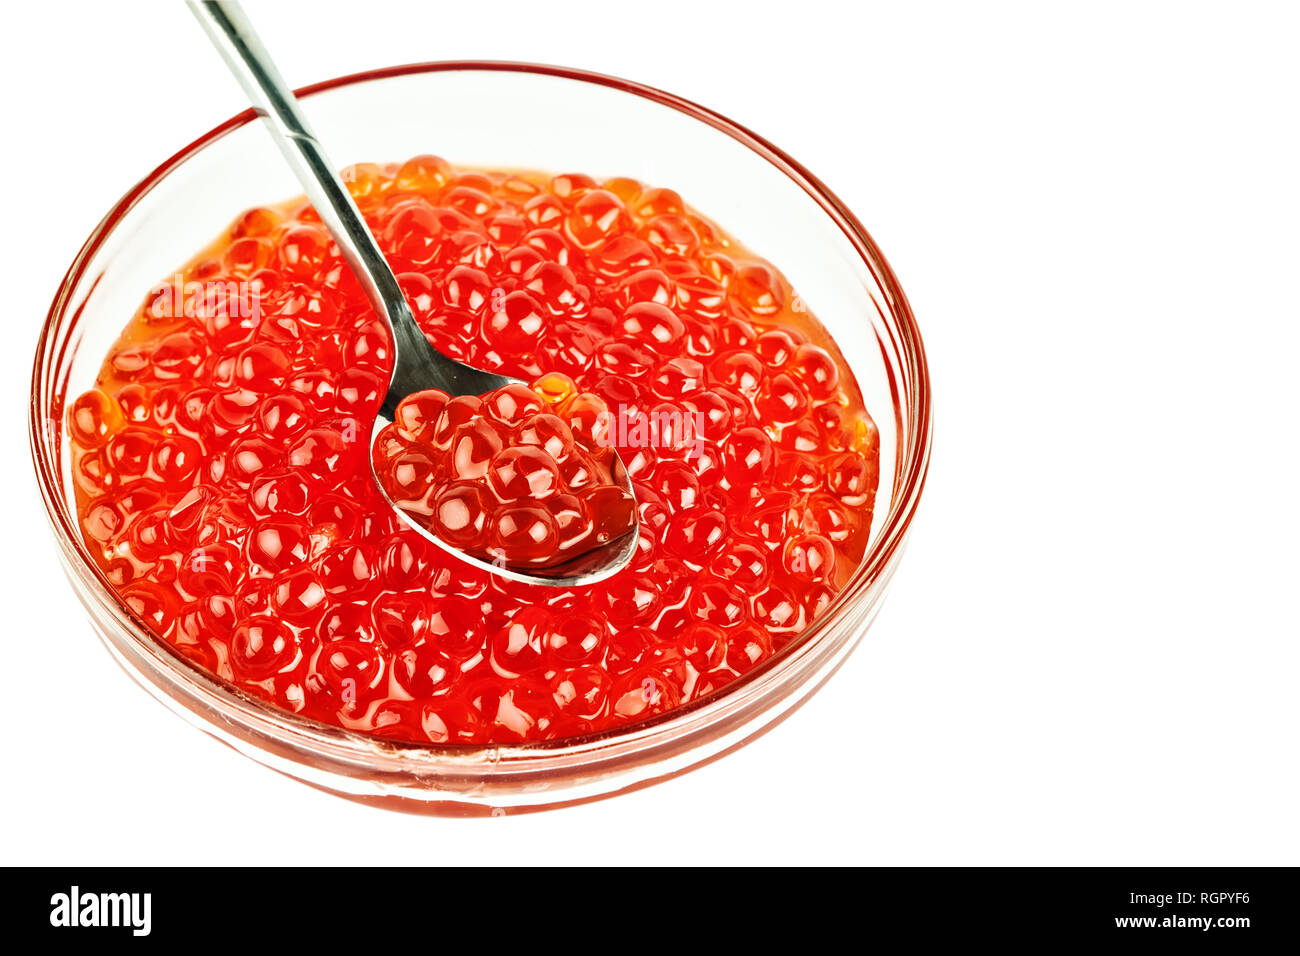 Red caviar in a glass container. Isolated object on white background. Stock Photo